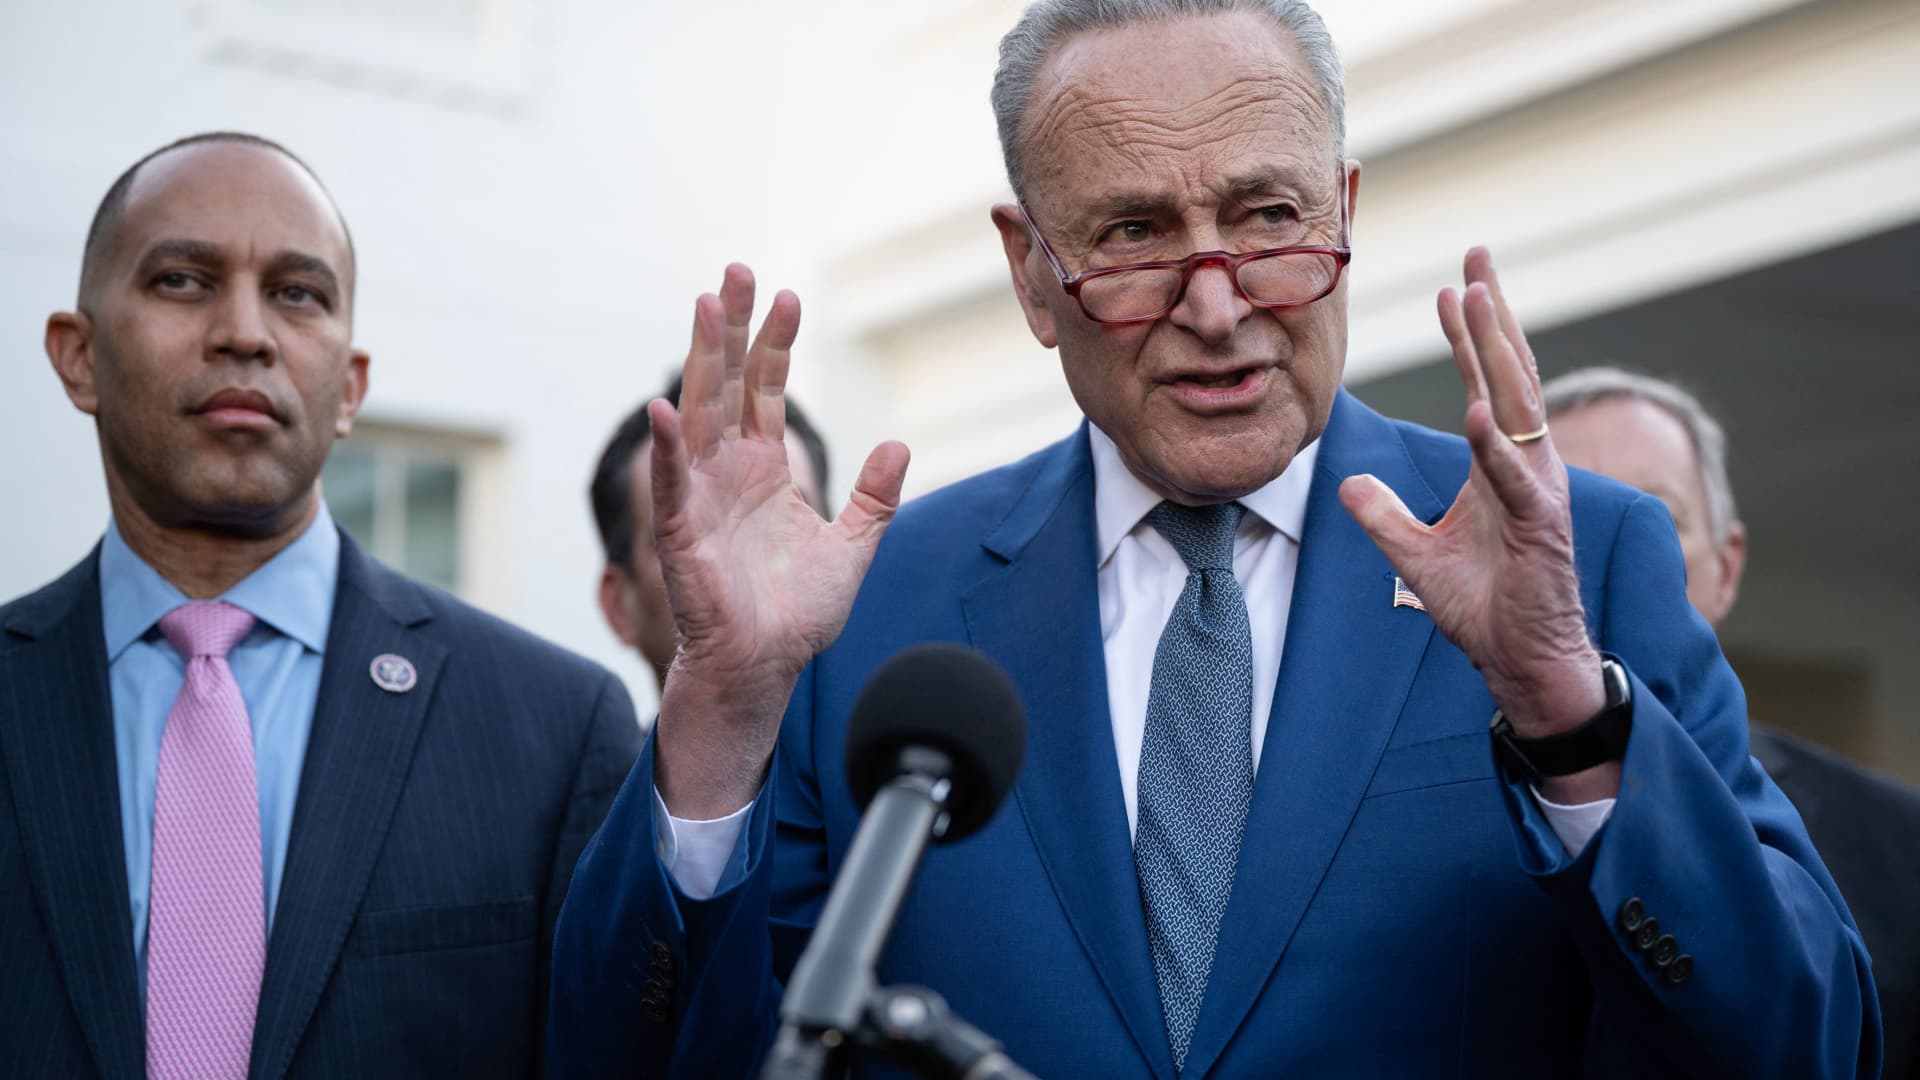 Democrats harden their message on the debt ceiling while quietly paving the way for a deal